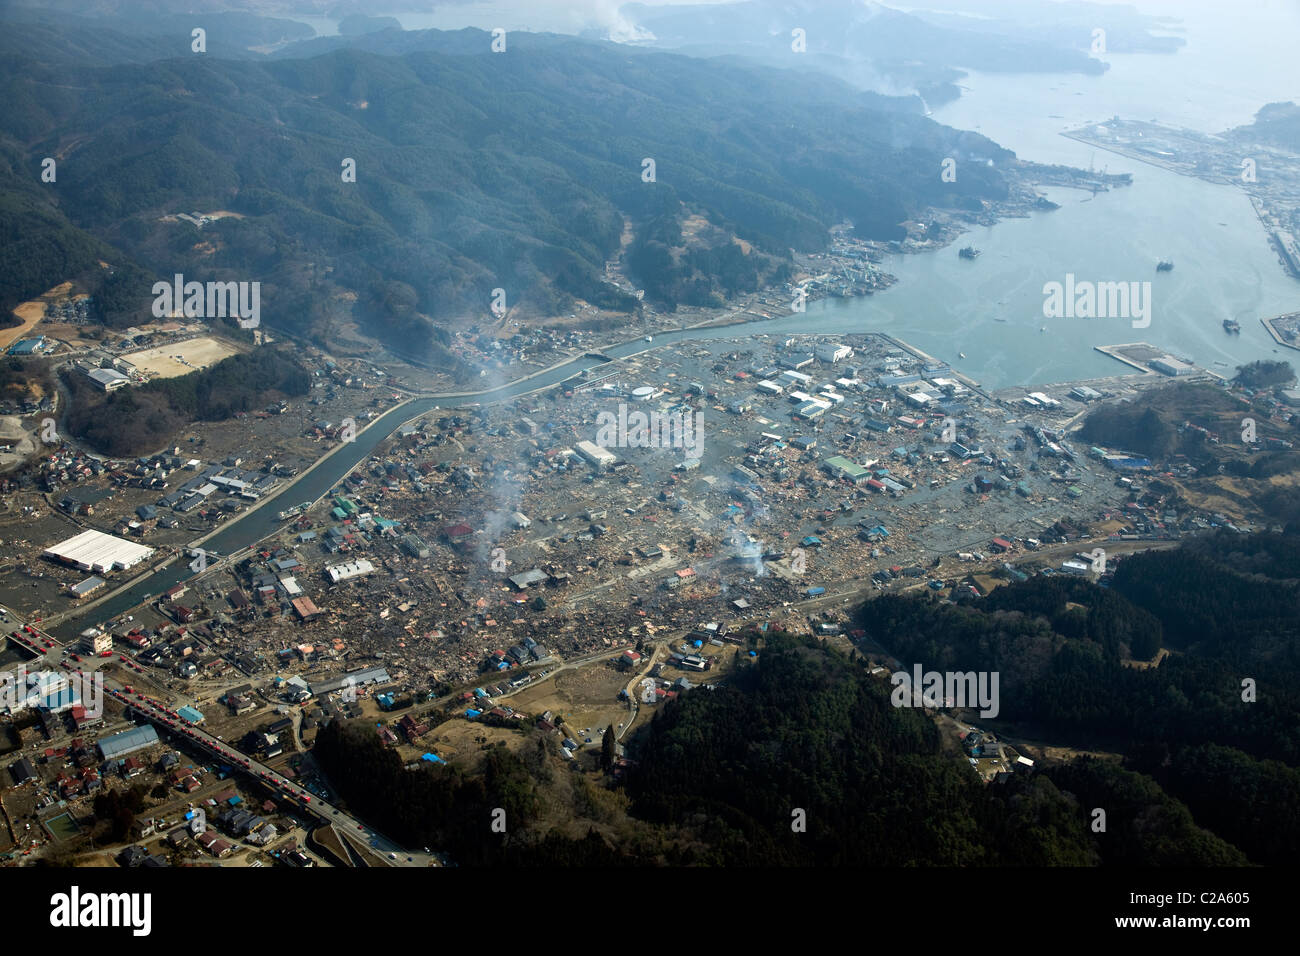 Aerial view of damage to Kesennuma, Miyagi Prefecture after a 9. 0 magnitude earthquake and subsequent tsunami devastated the Stock Photo